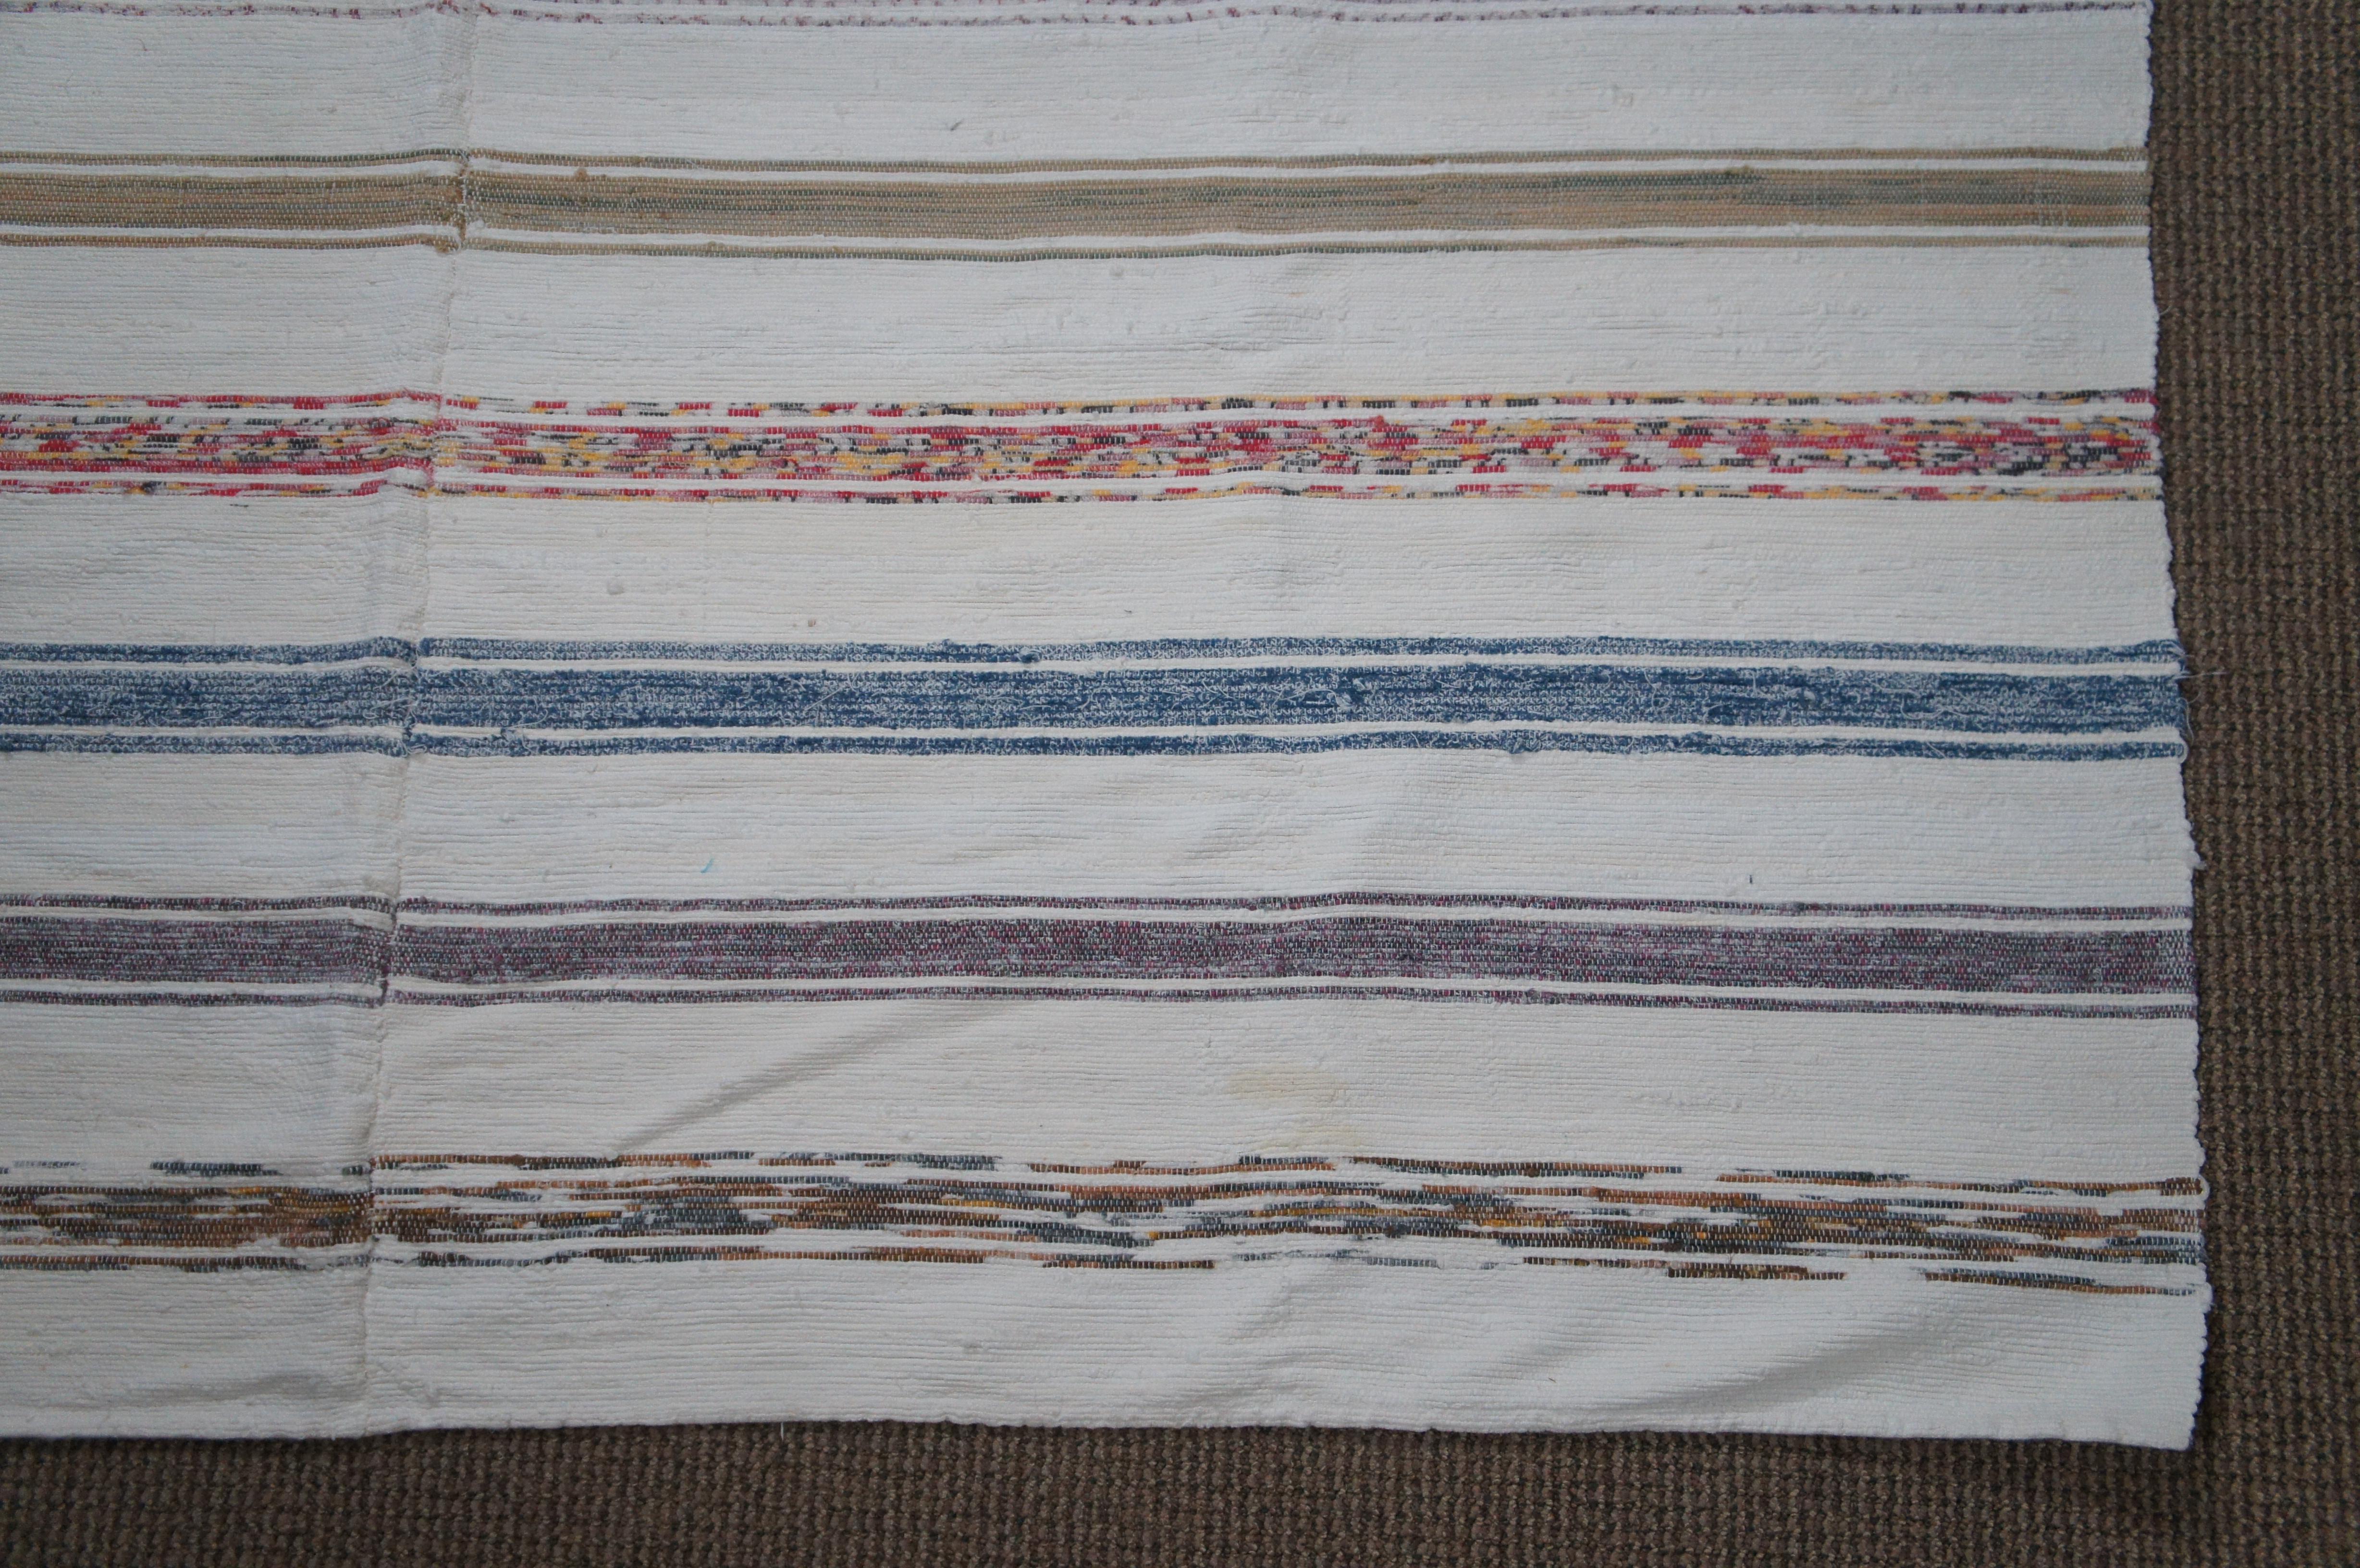 20th Century 2 Vintage Colorful Hand Loomed Striped Cotton Rag Blankets Bedspread Rug Pair 